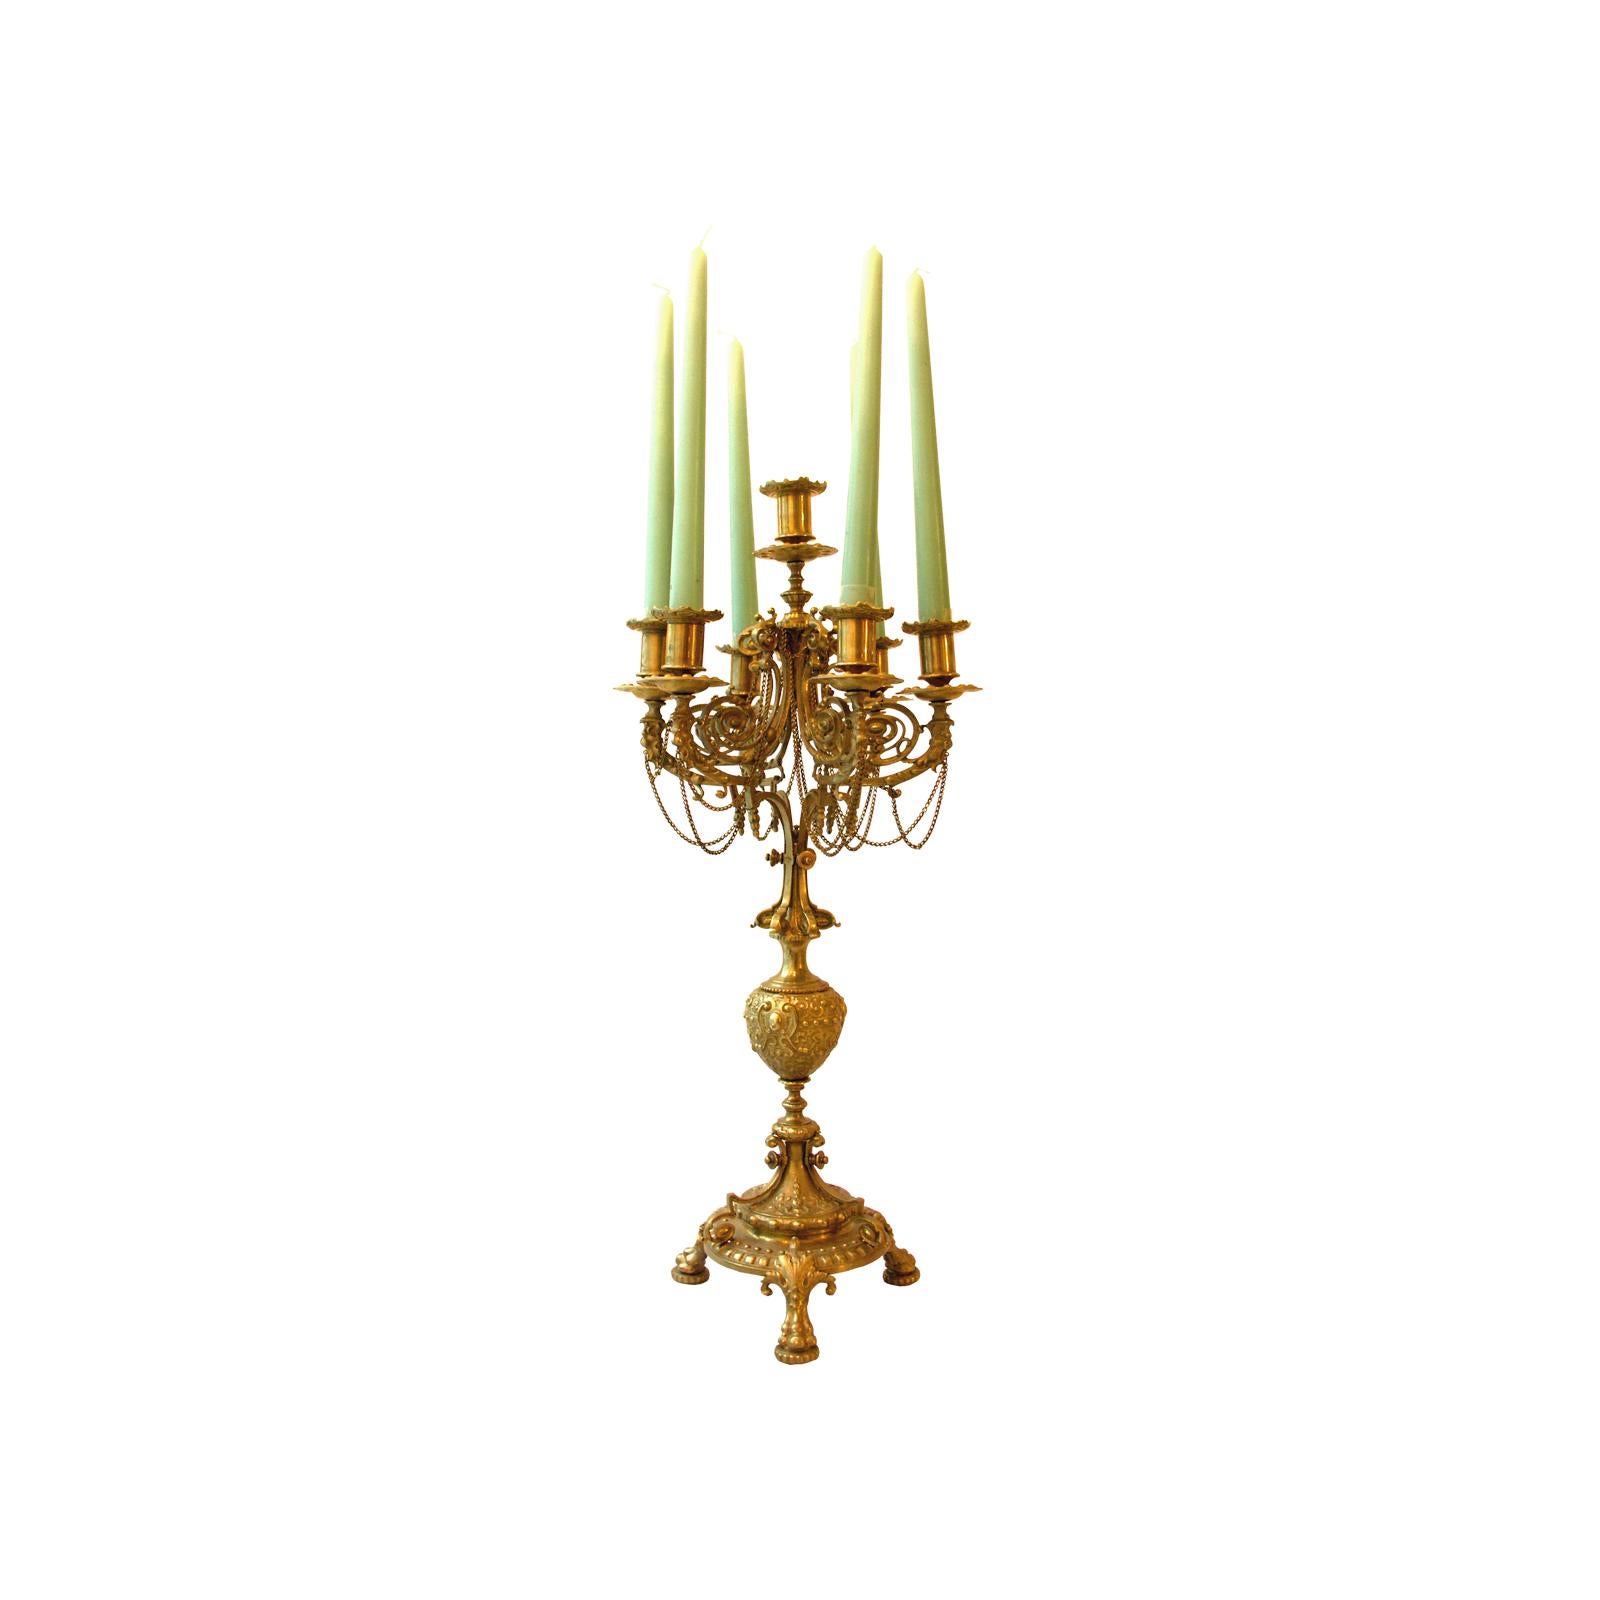 Historistic candlesticks rich engraved and decorated two pieces in the Louis Seize style
Guilded bronze.